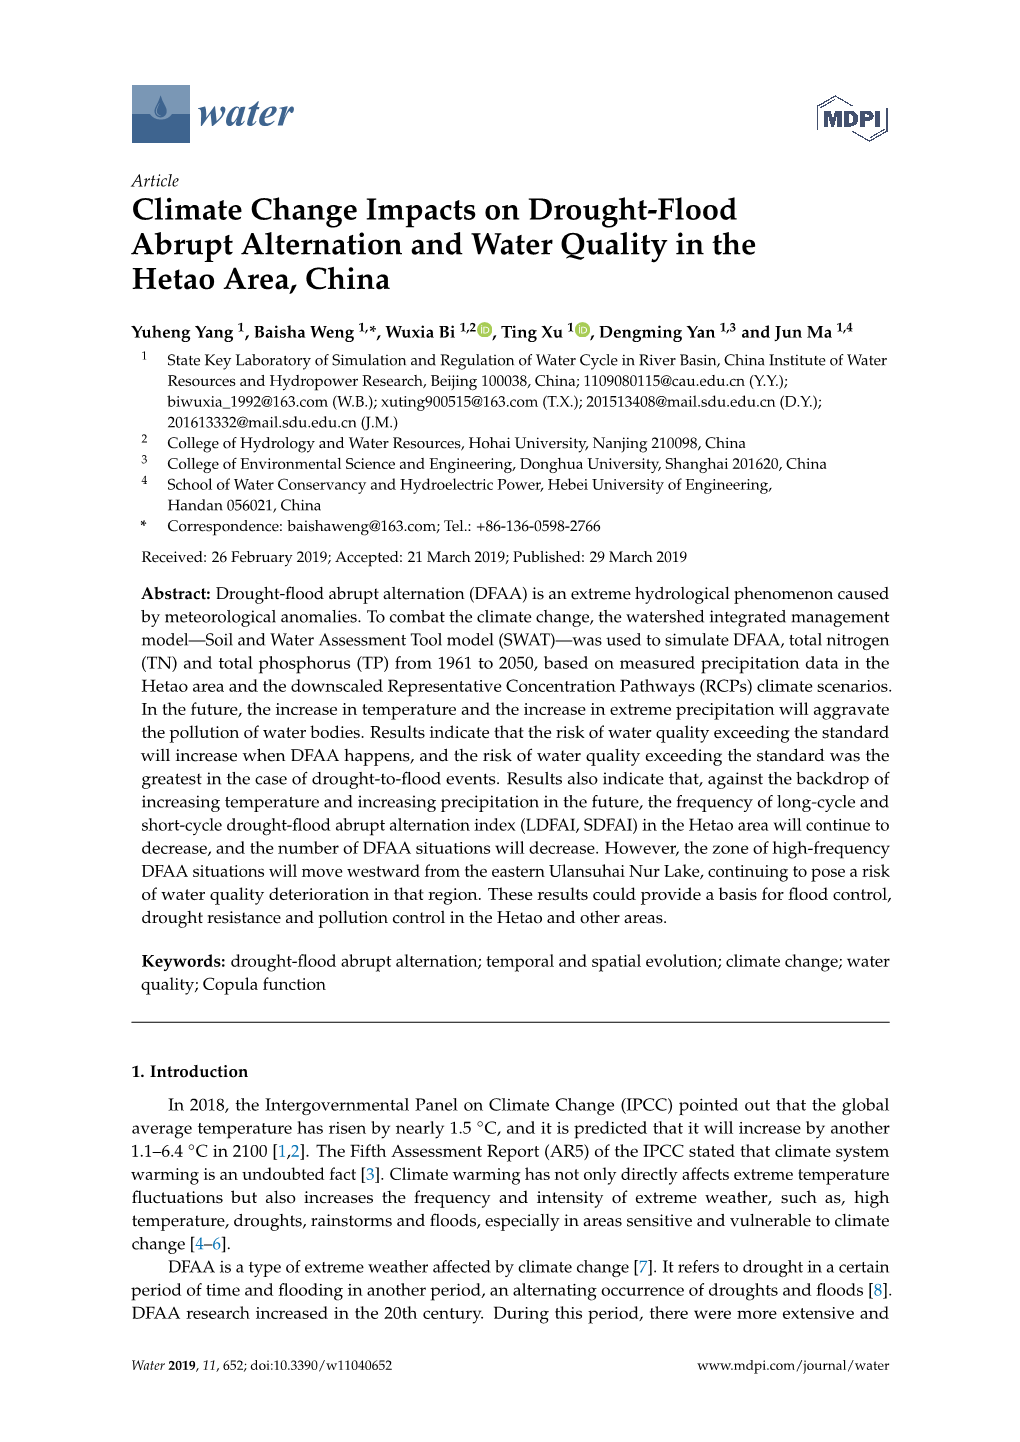 Climate Change Impacts on Drought-Flood Abrupt Alternation and Water Quality in the Hetao Area, China